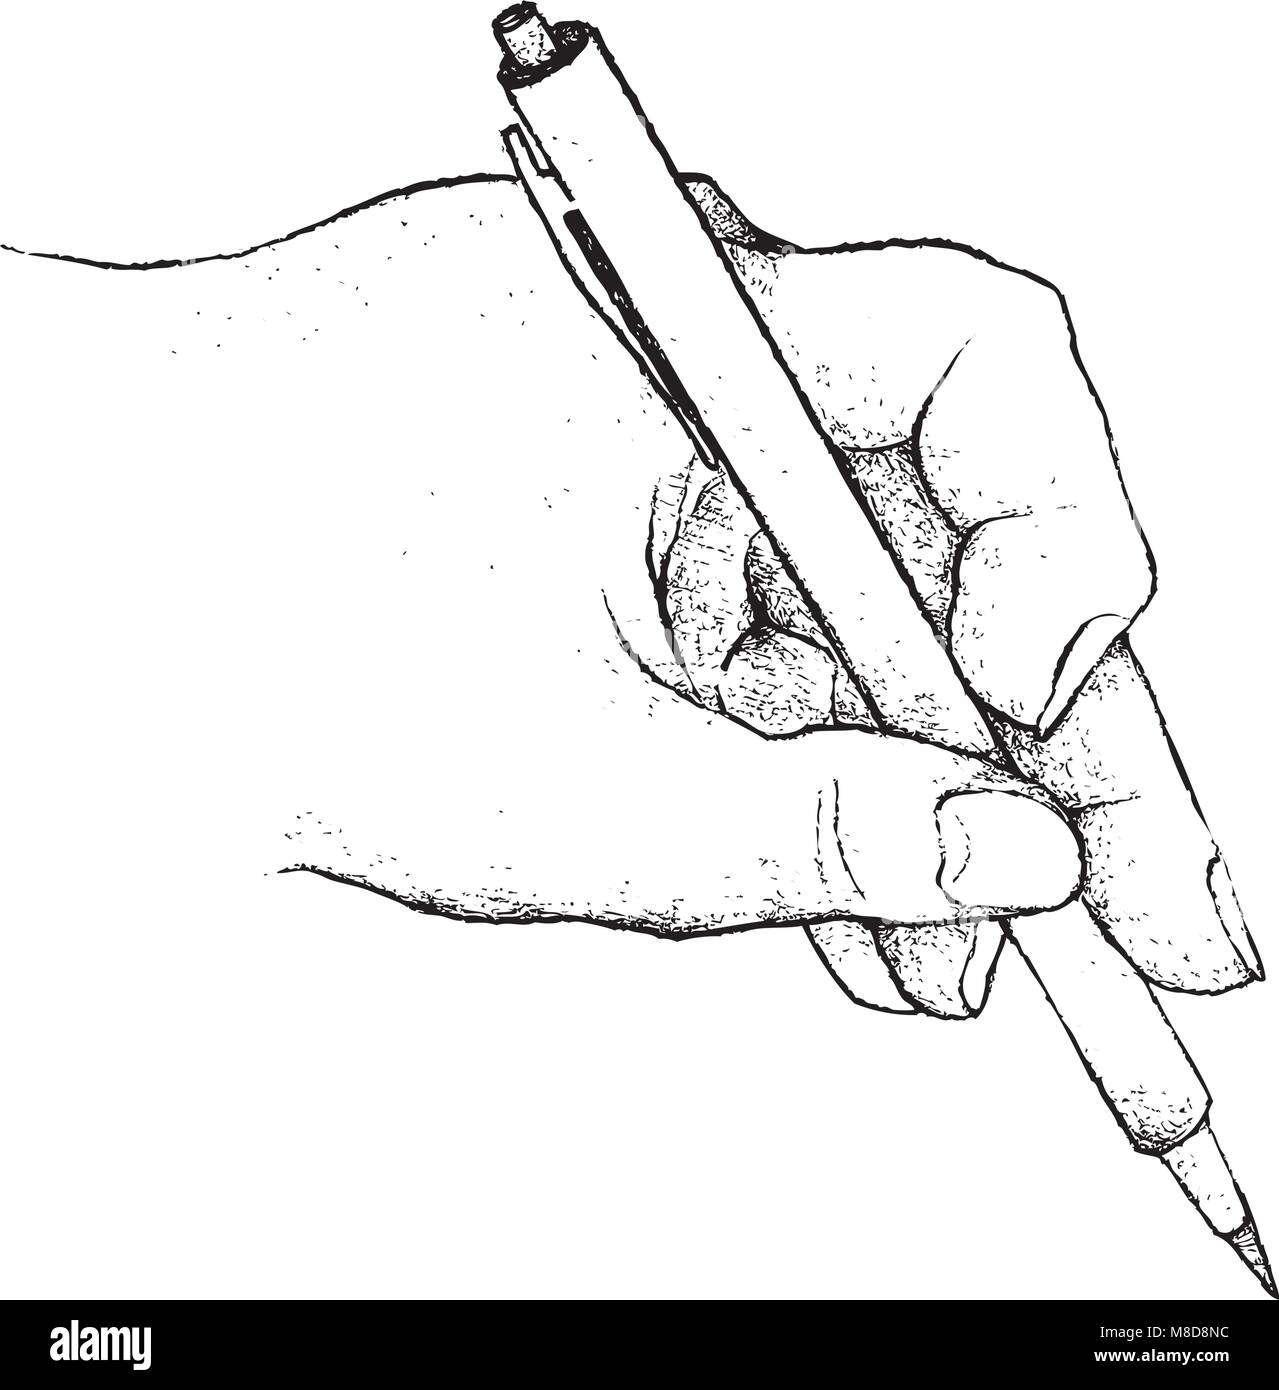 Illustration of Hand Drawn Sketch Person Holding A Pen and